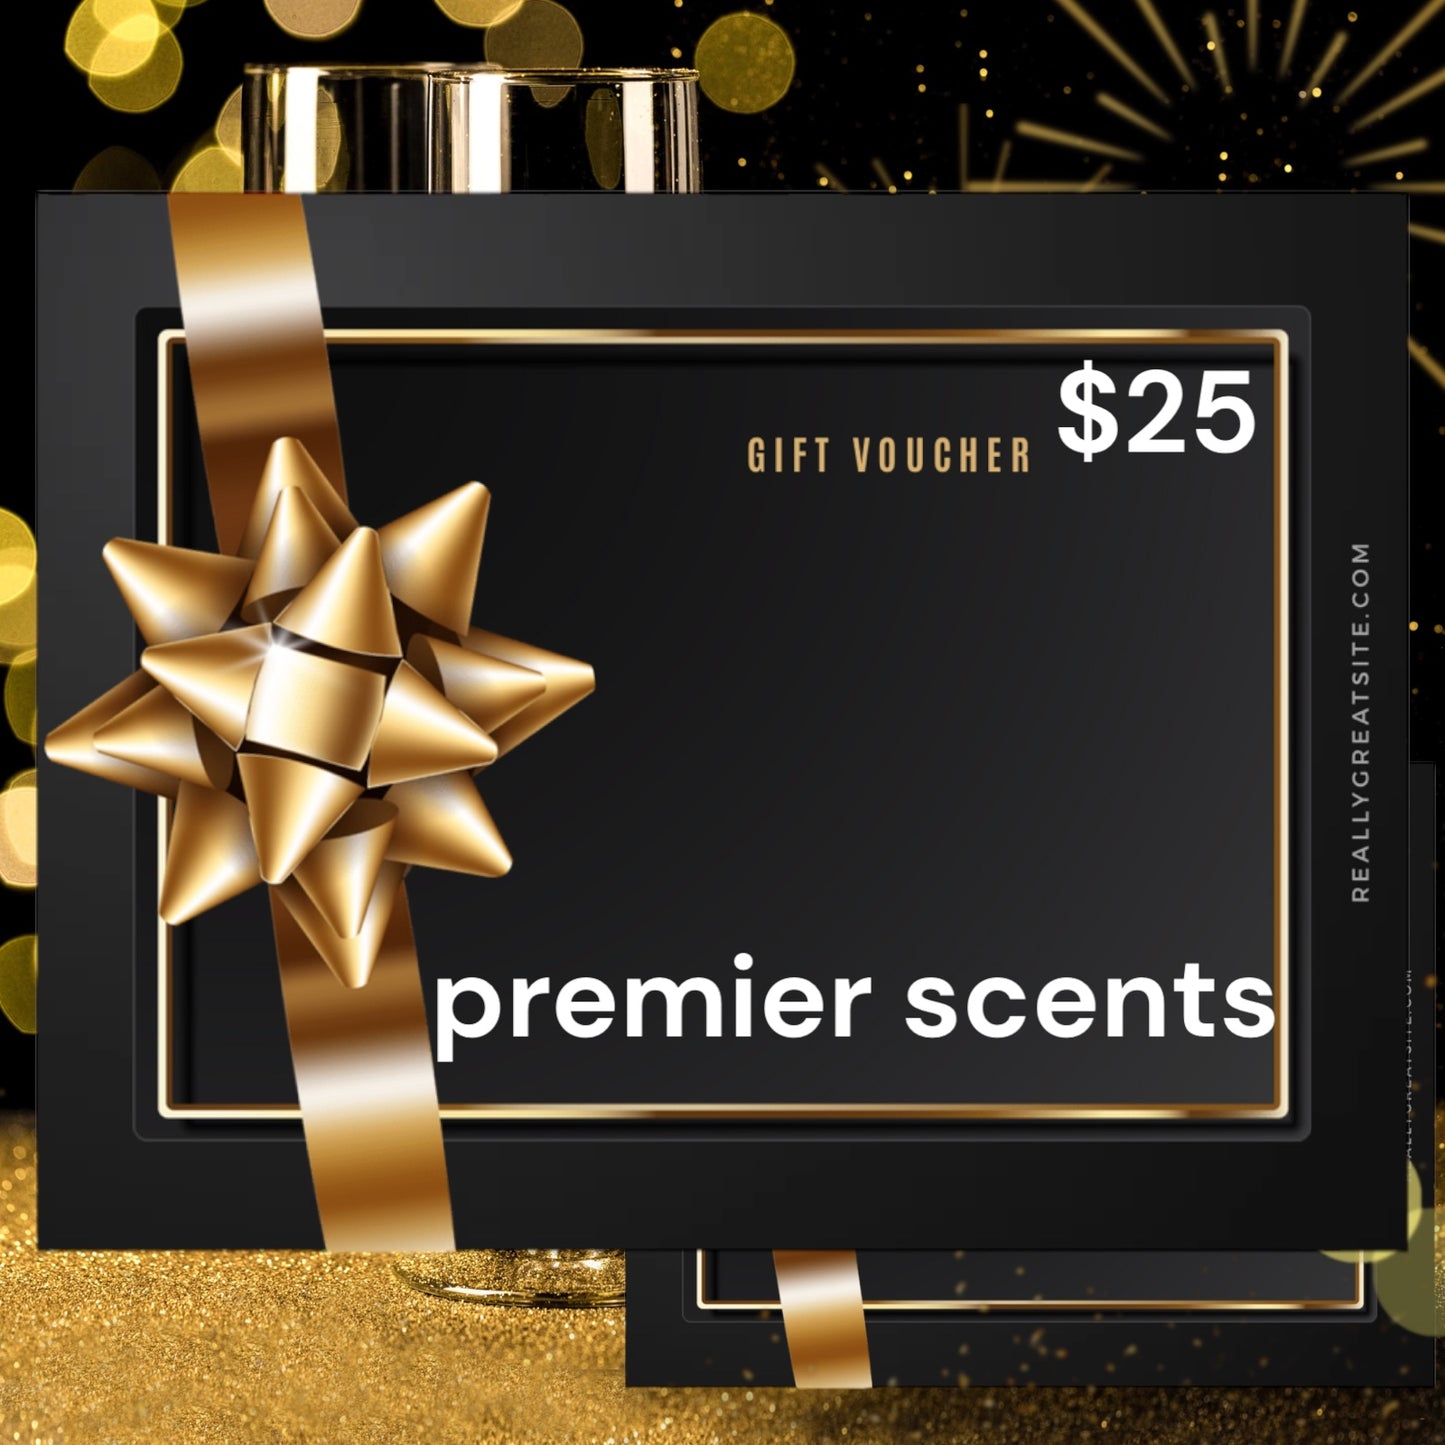 Premier Scents gift card